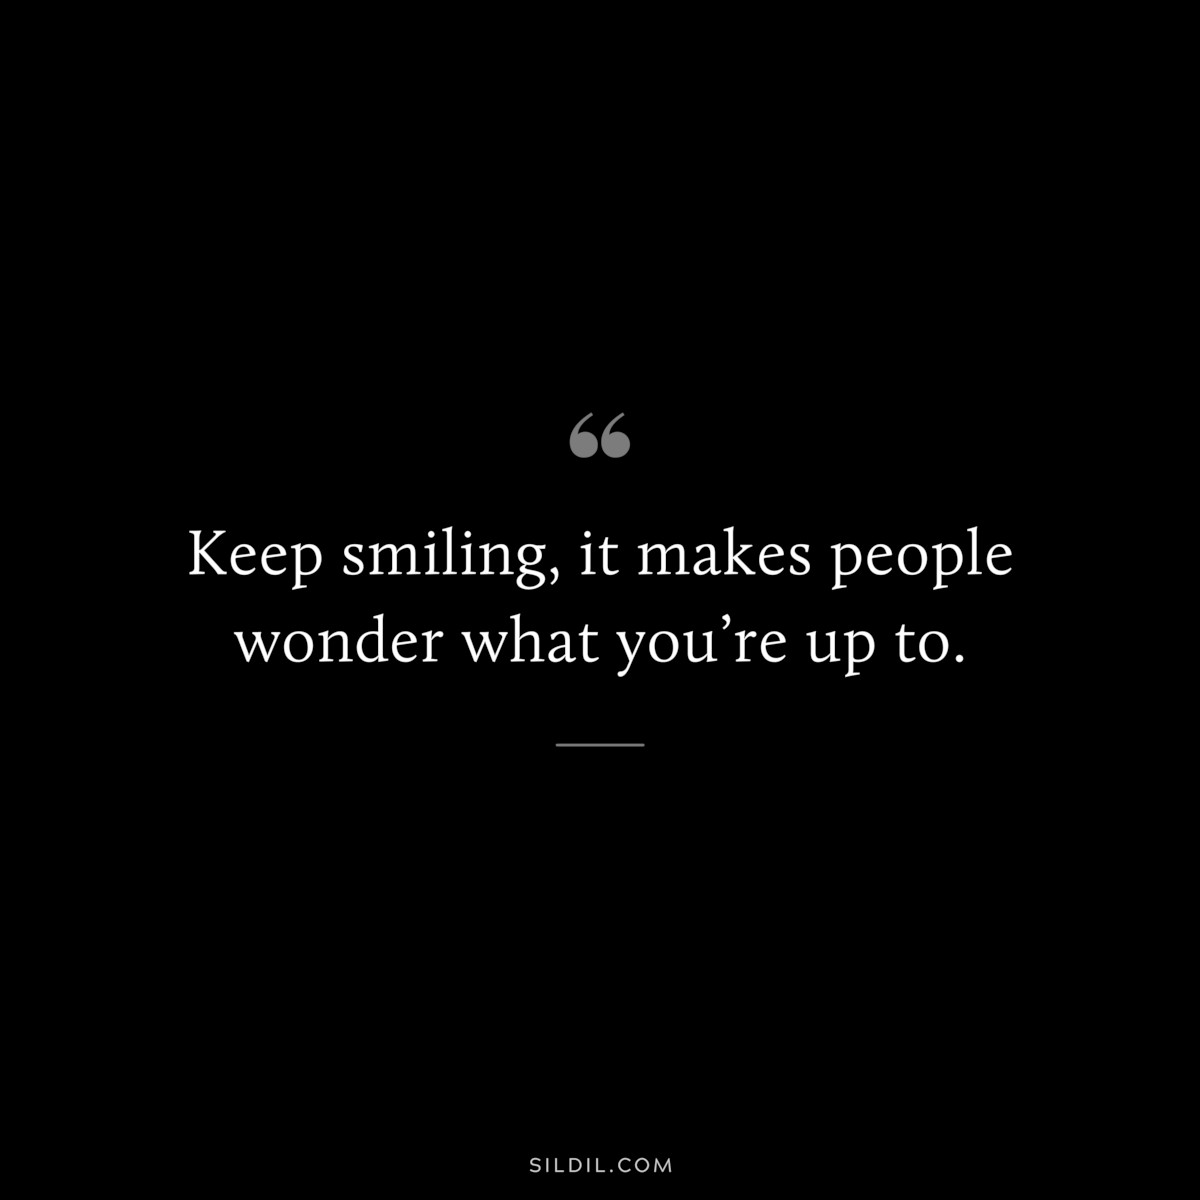 Keep smiling, it makes people wonder what you’re up to.